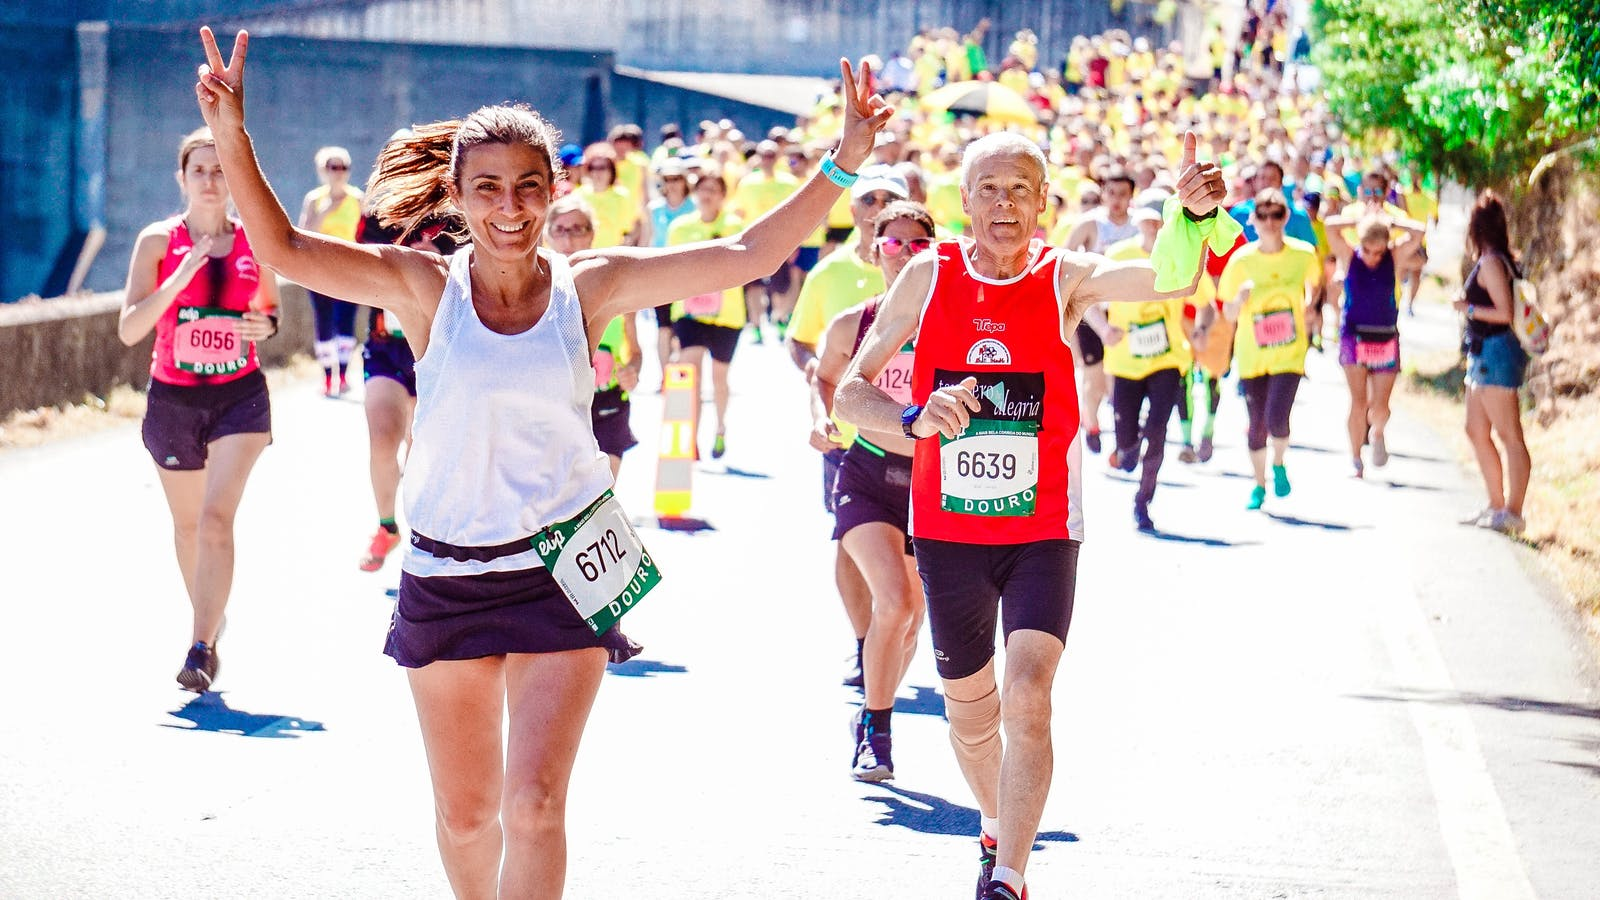 Joining fun run is a good idea | Photo from Pexels Website